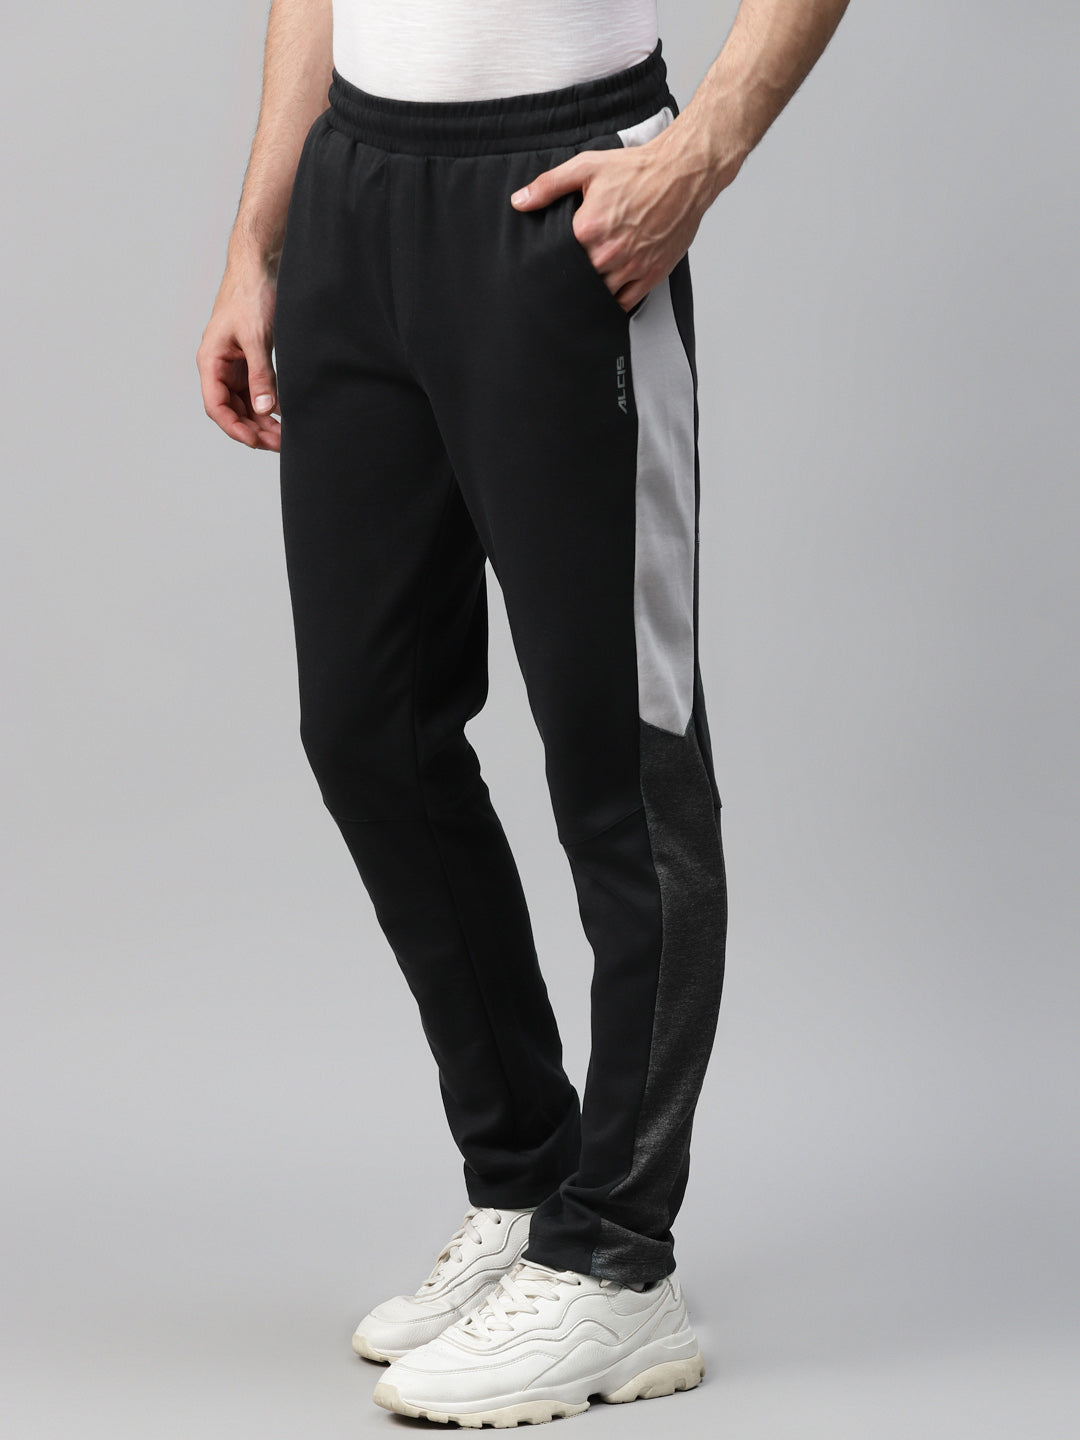 Kappa Trousers outlet - Men - 1800 products on sale | FASHIOLA.co.uk